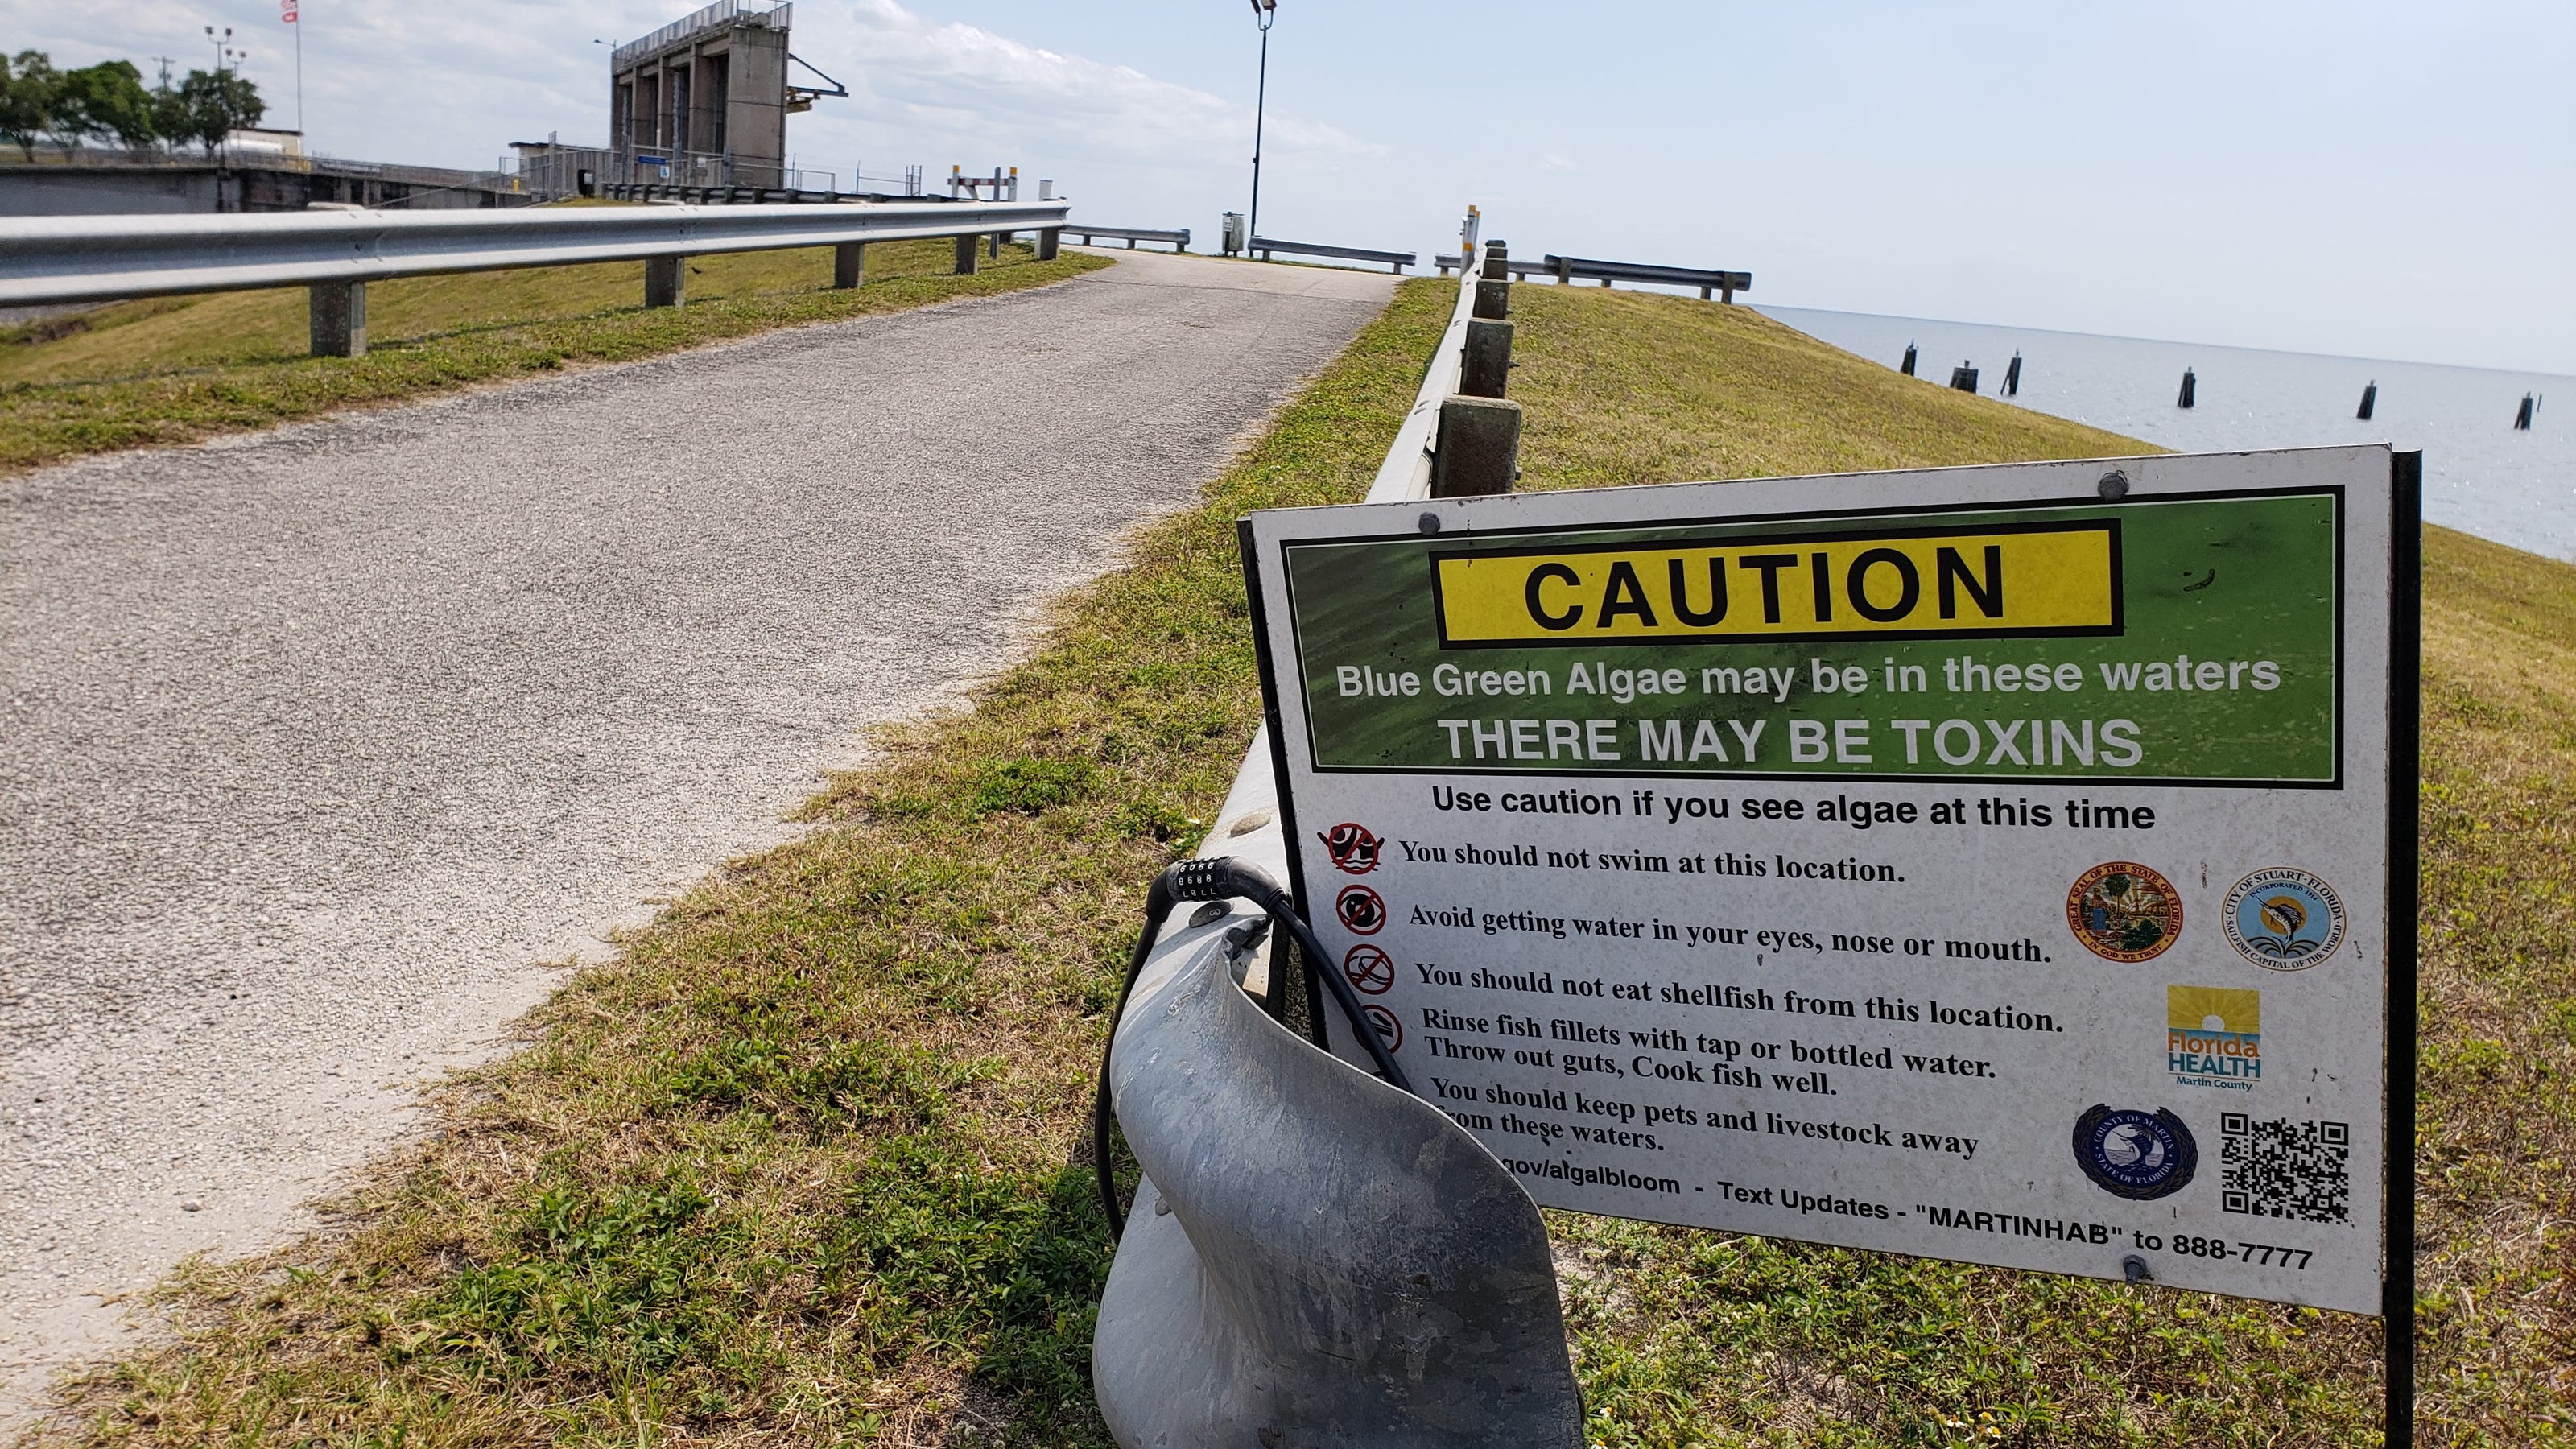 Toxic algae: Health alert now lifted for these Martin County waters - TCPalm